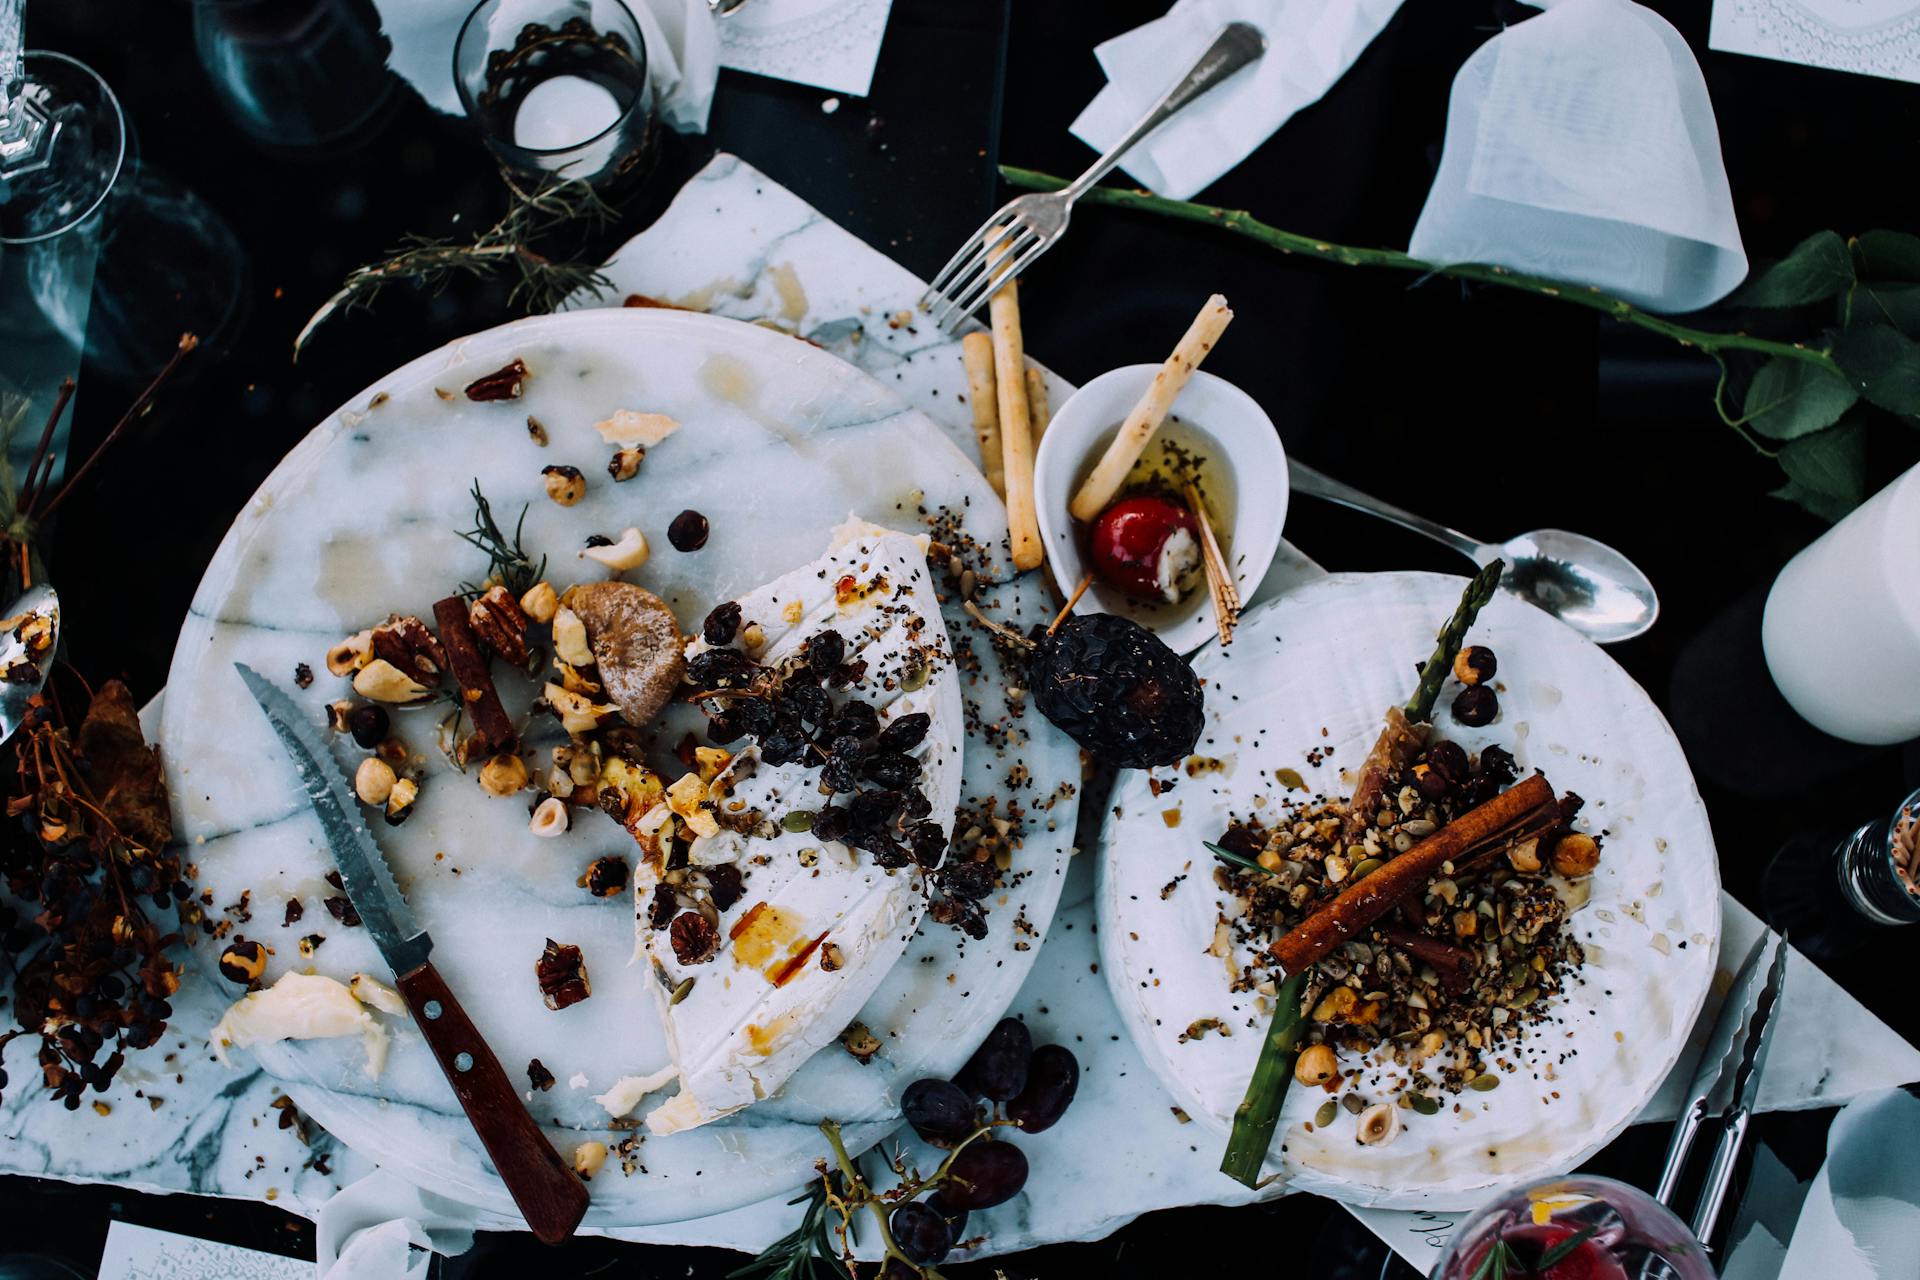 A messy table with leftover food | Source: Pexels